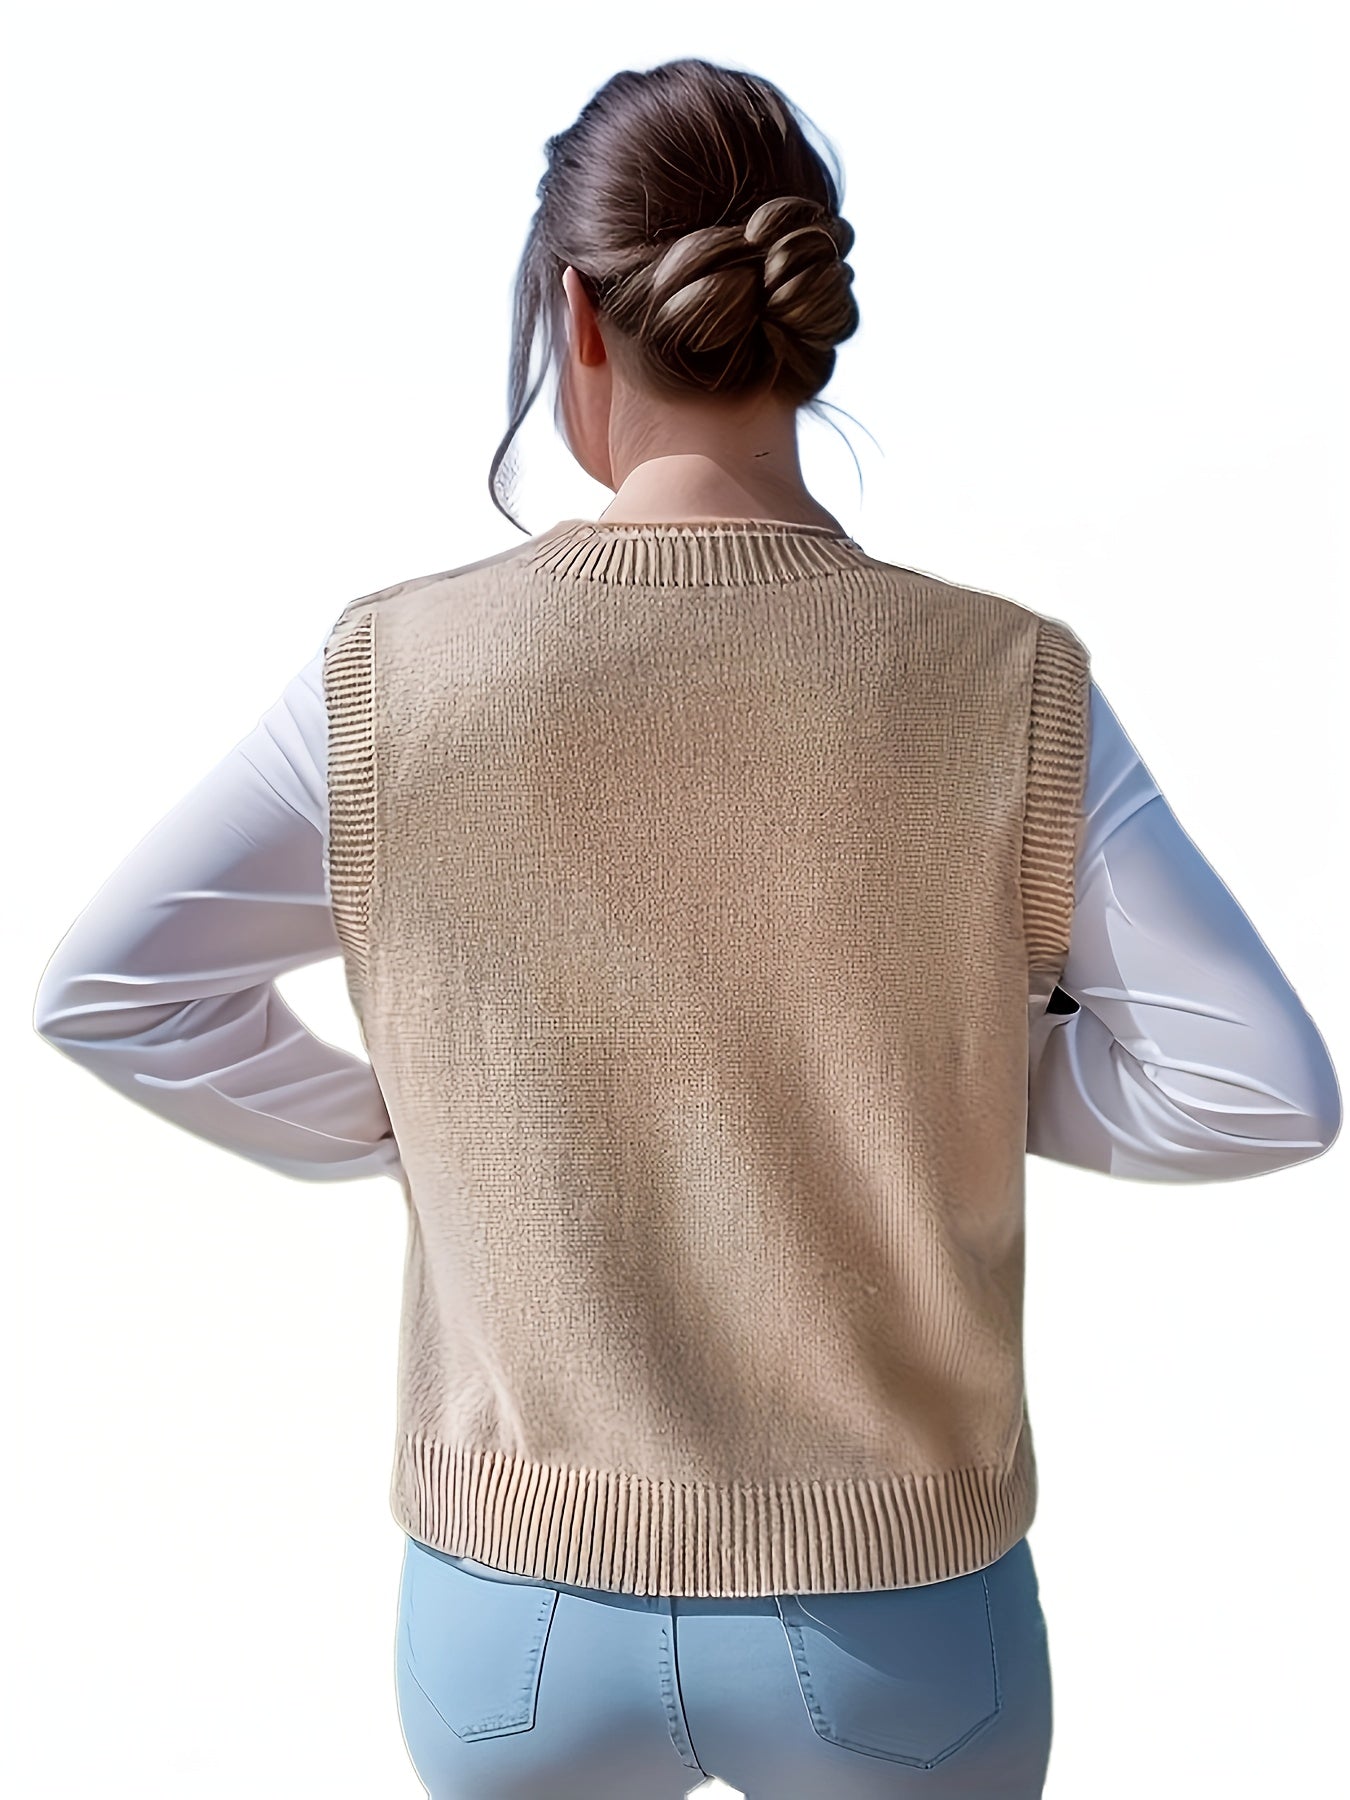 vlovelaw  Solid Cable Knit Sweater Vest, Casual V Neck Sleeveless Vest, Women's Clothing